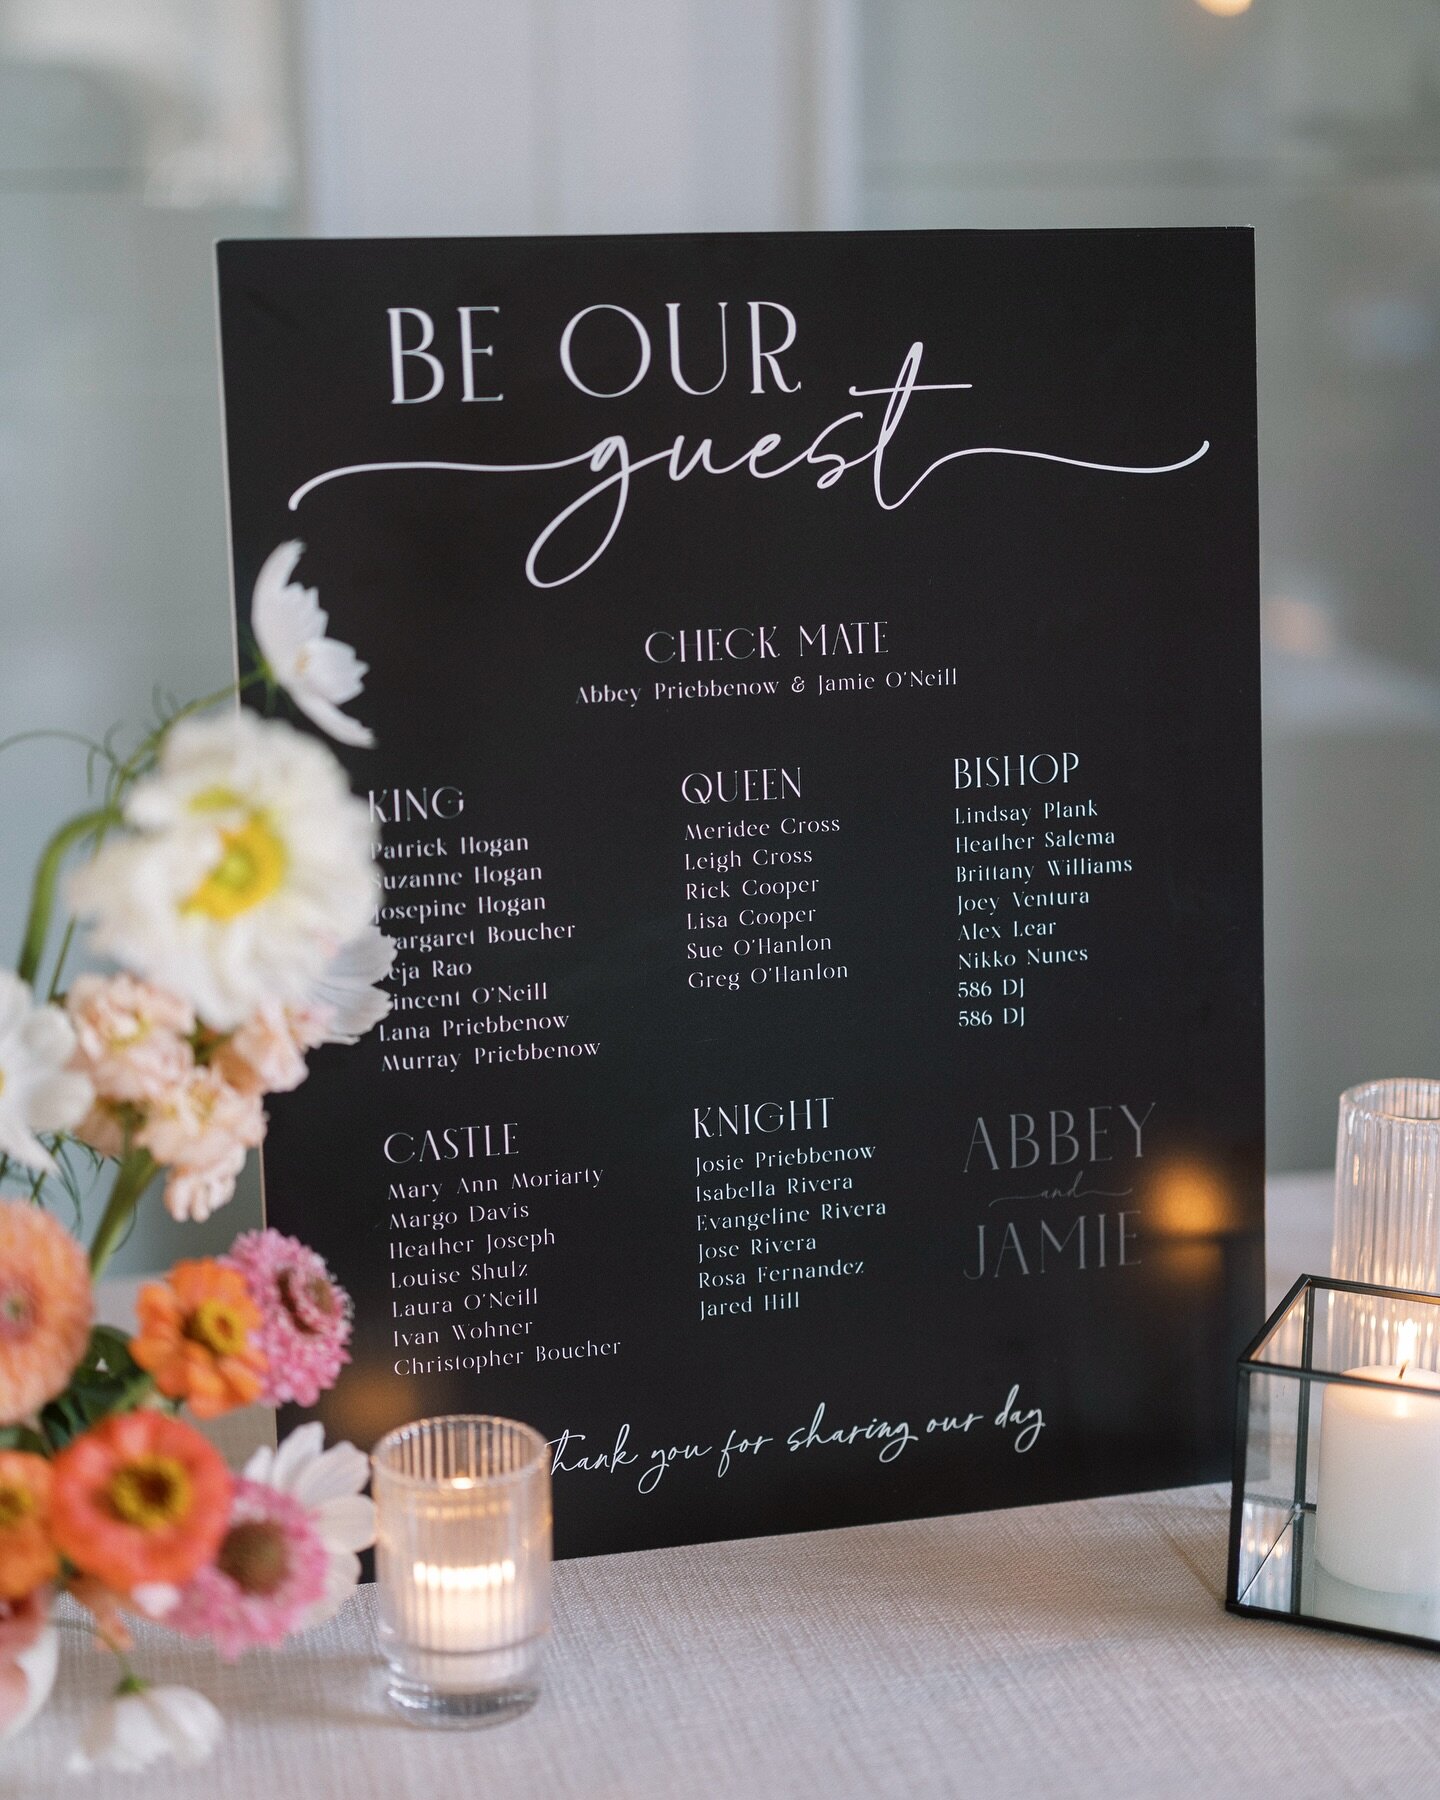 Did your table numbers have unique names? A&amp;J&rsquo;s table numbers were inspired by how they met and their love for chess! ♟️ ❤️

Full Planning + Design : @lindsayplankevents
Photography: @brittanymwilliams  Stationery: @graphically_yours
Floral